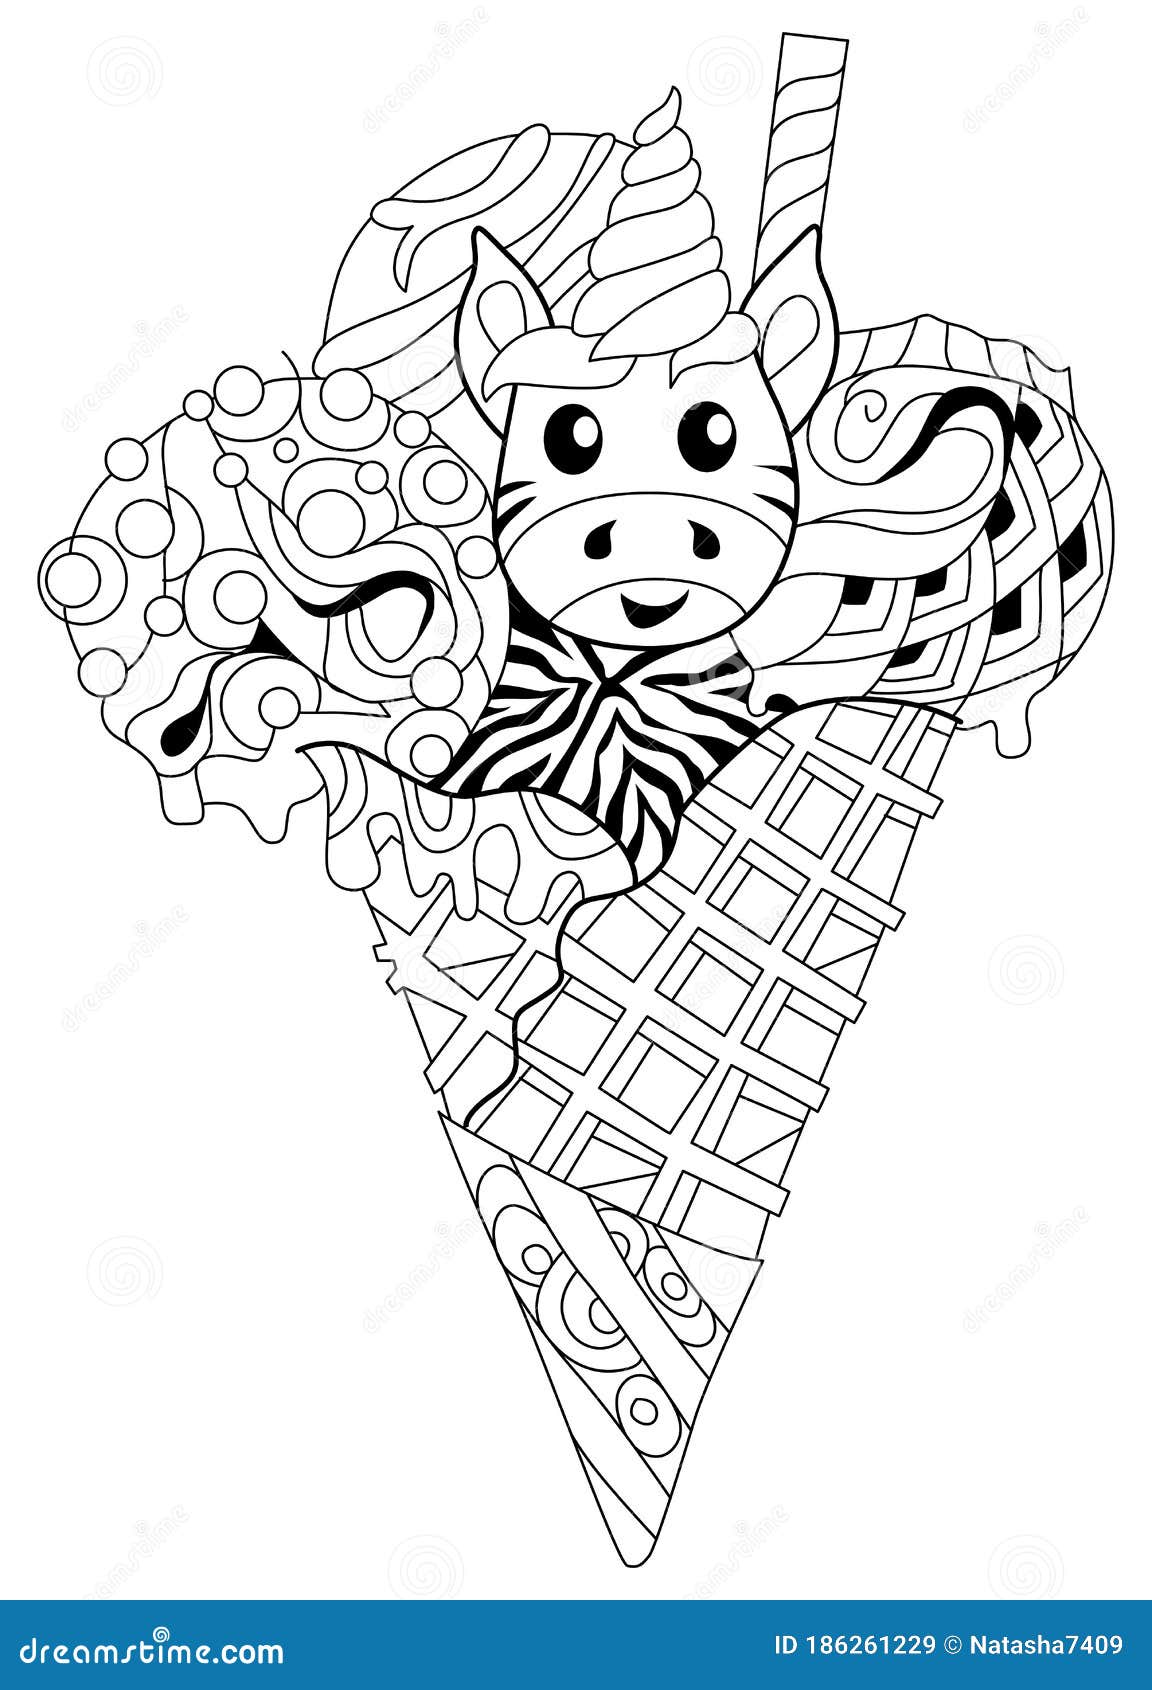 Ice Cream with Unicorn Head. Drawn in Black and White Outline for